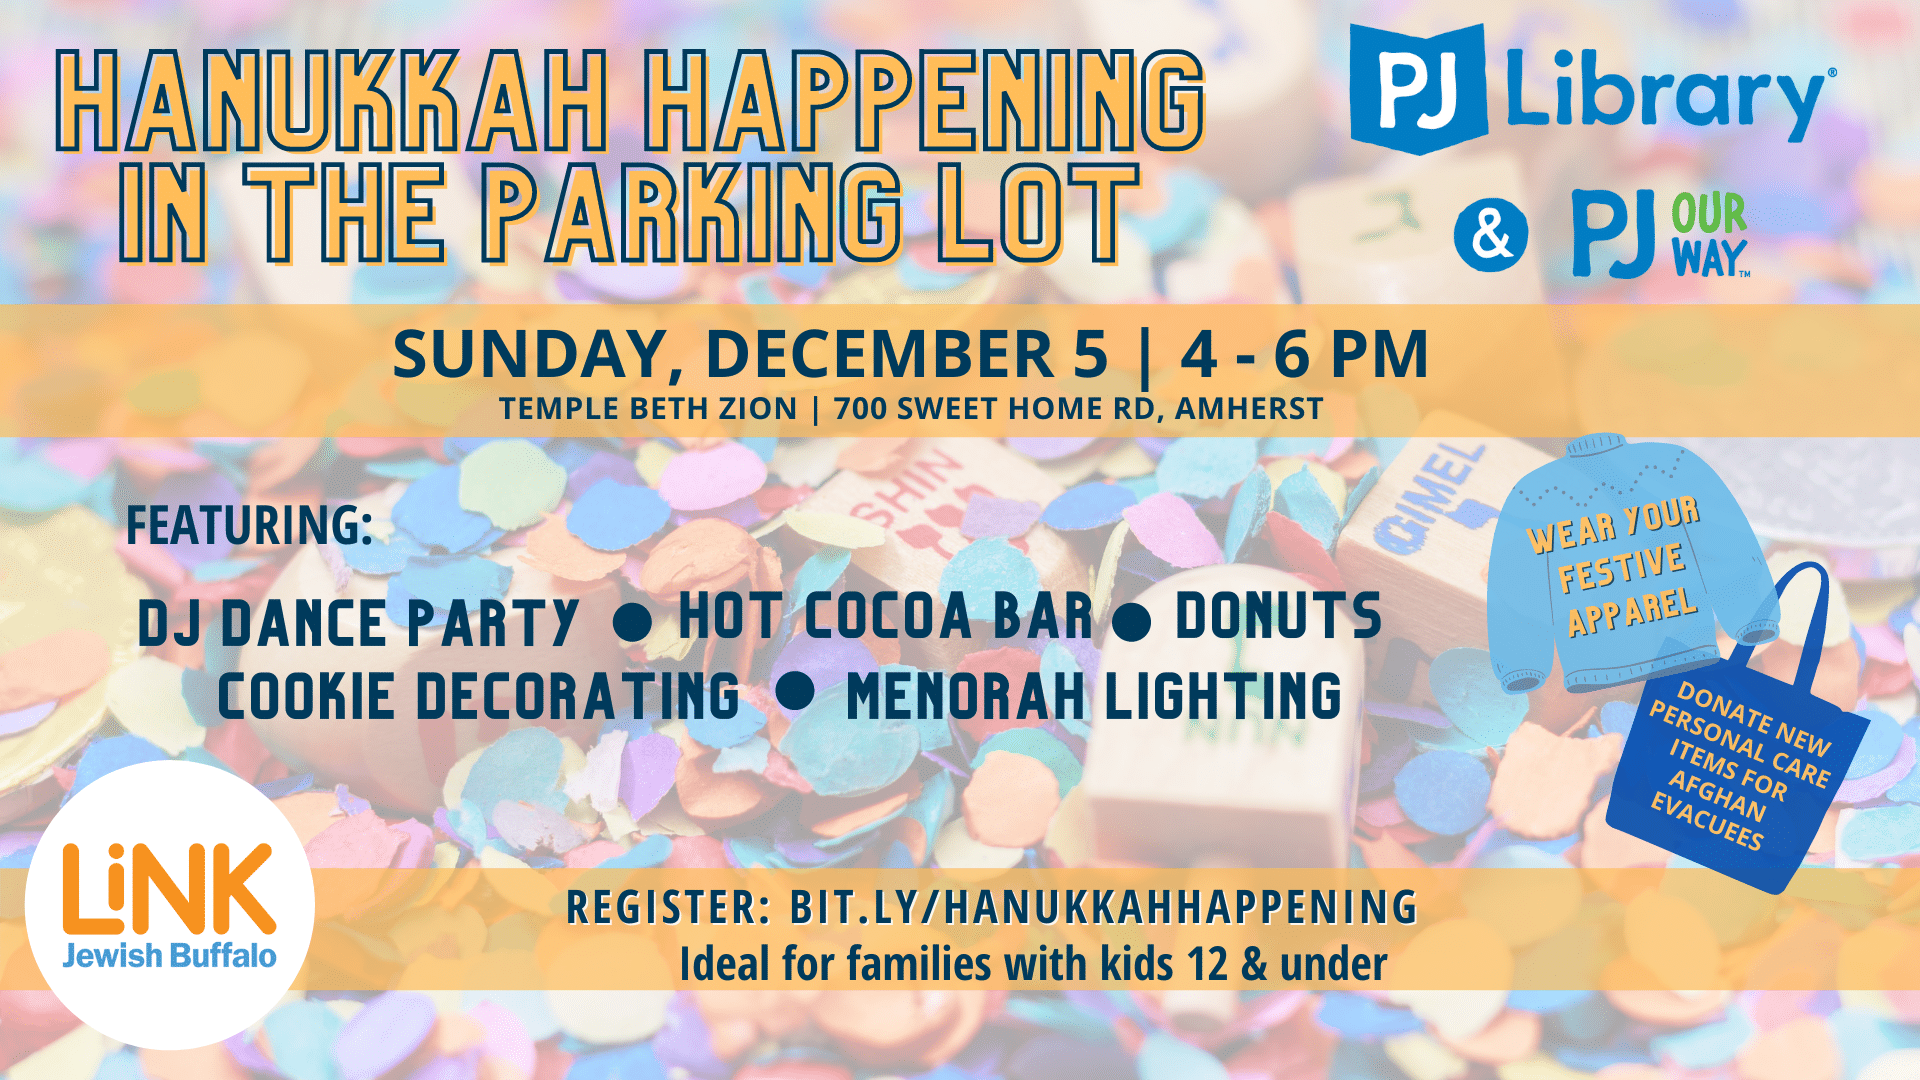 PJ Library & PJ Our Way Hanukkah Party - hanukah happening in the parking lot Facebook Event Cover